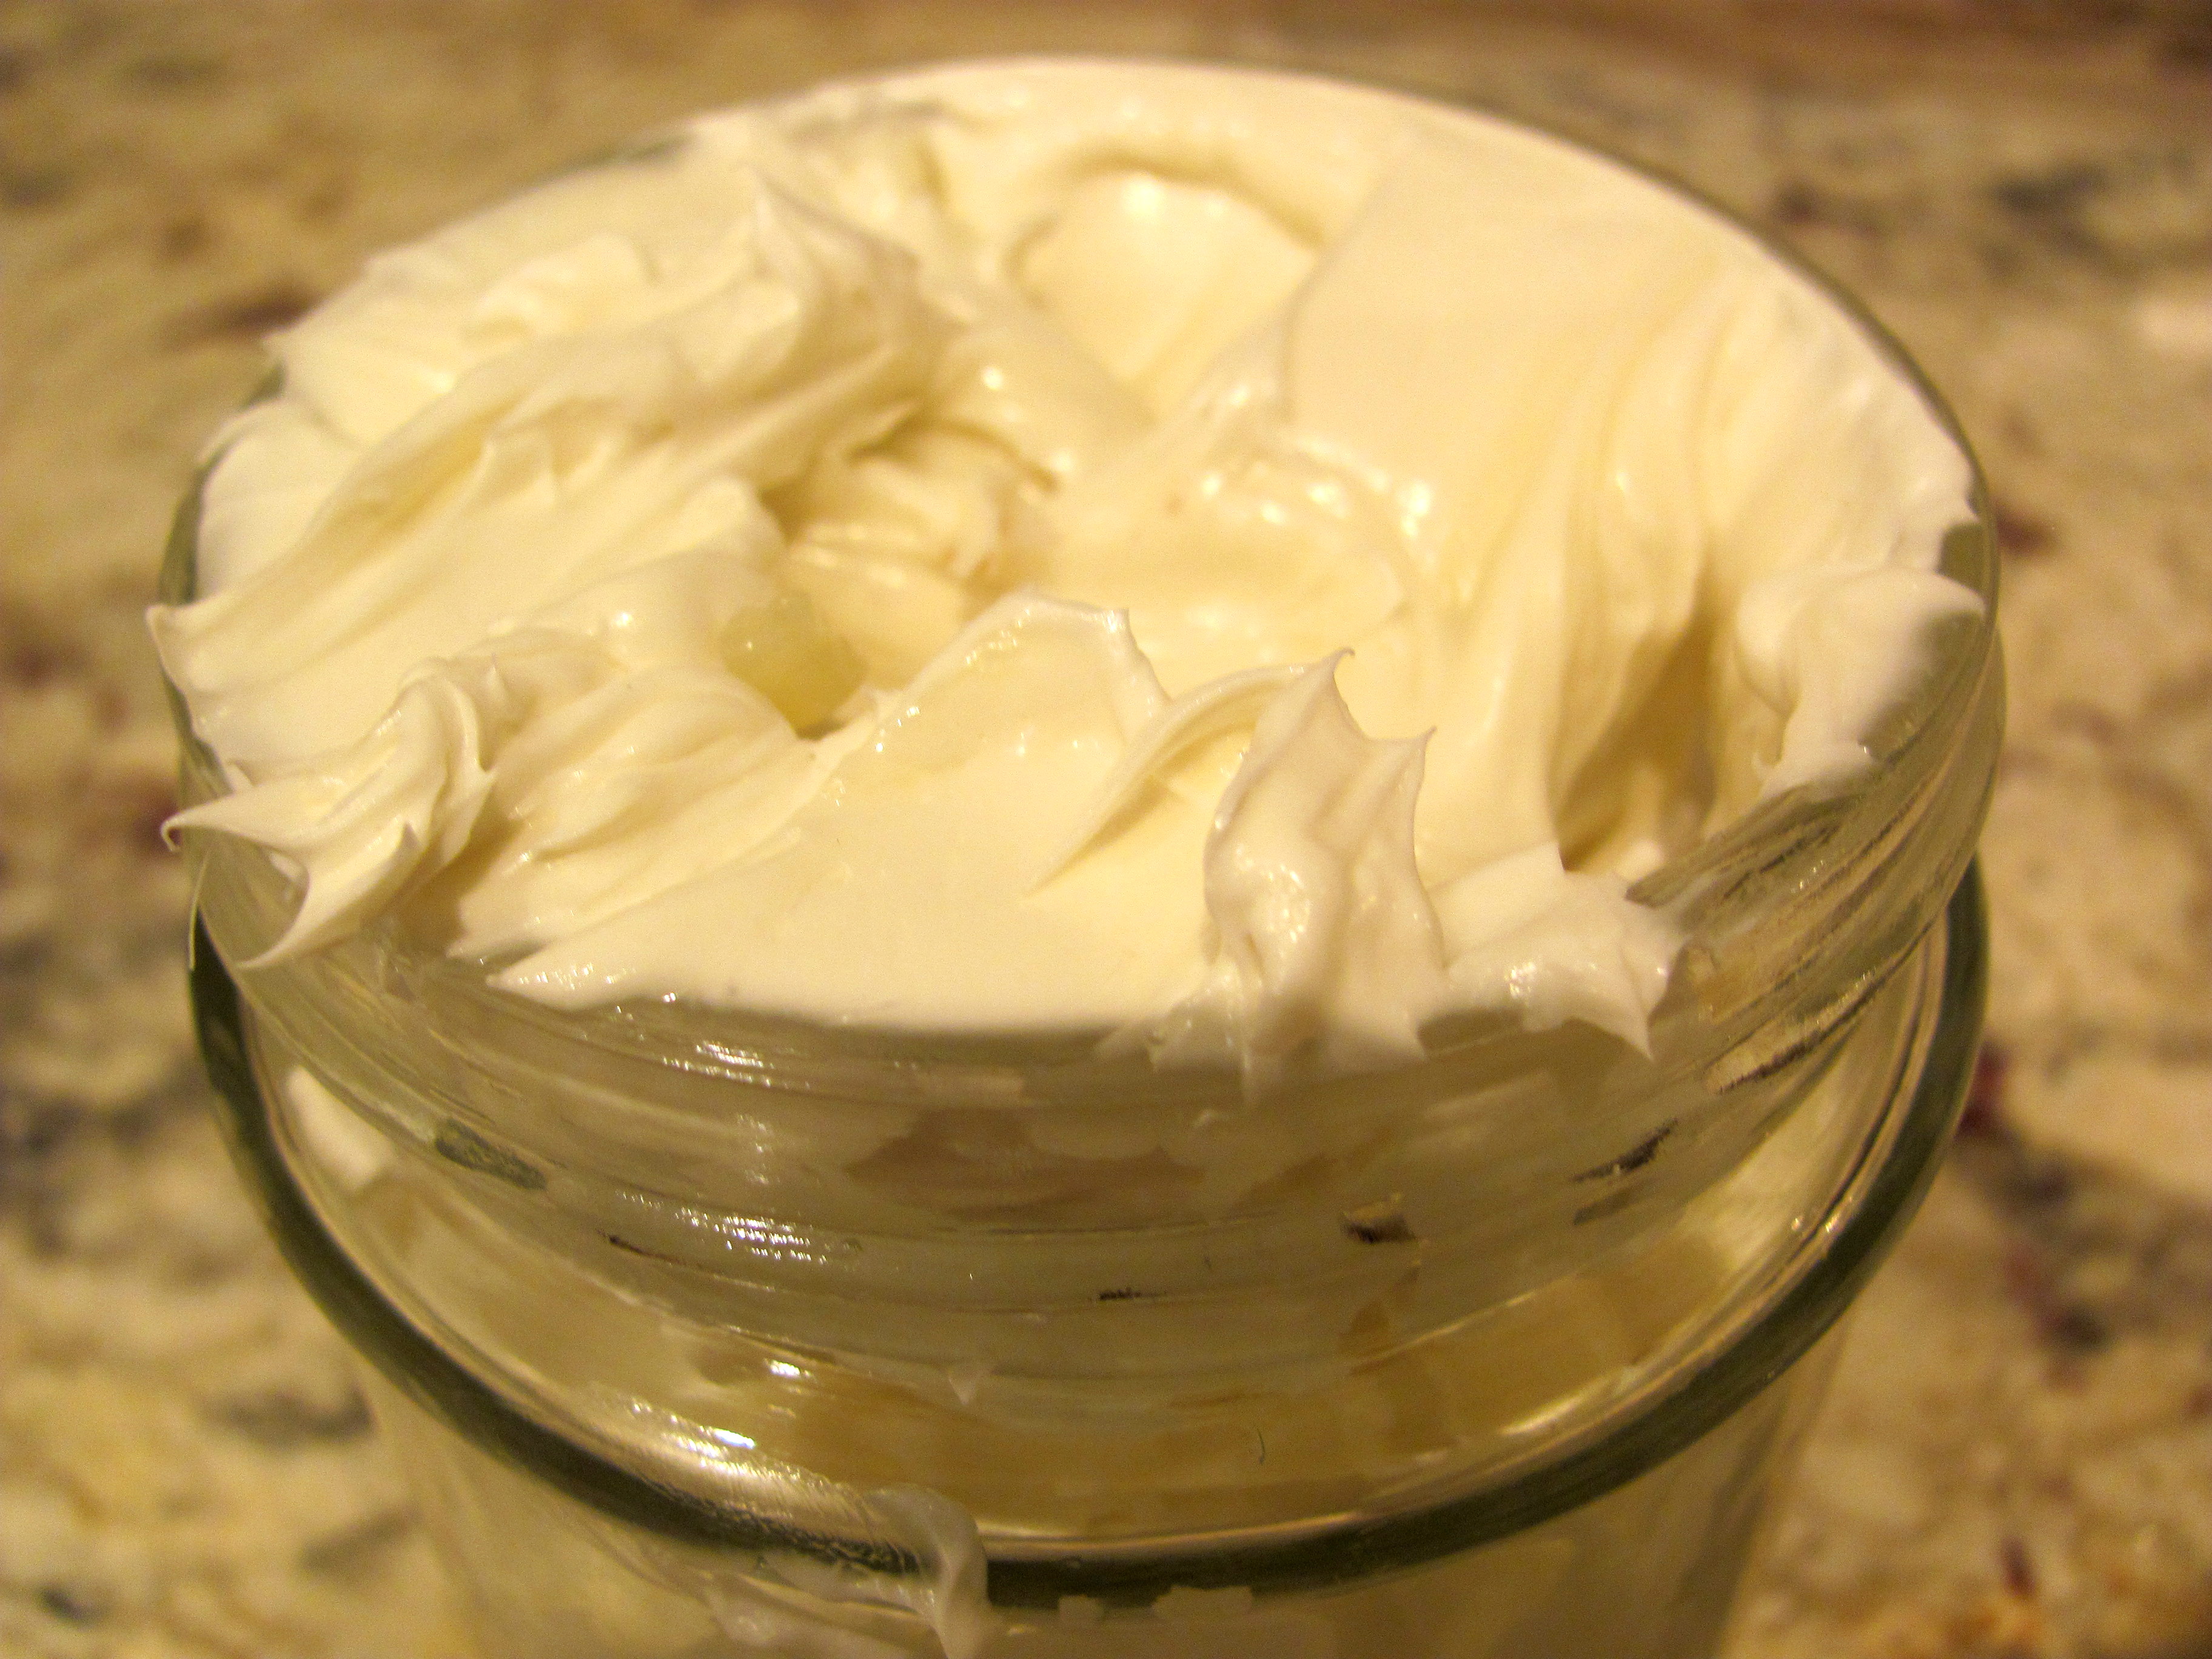 How to Make Whipped Body Butter with Coconut Oil, Cocoa Butter & Jojoba Oil